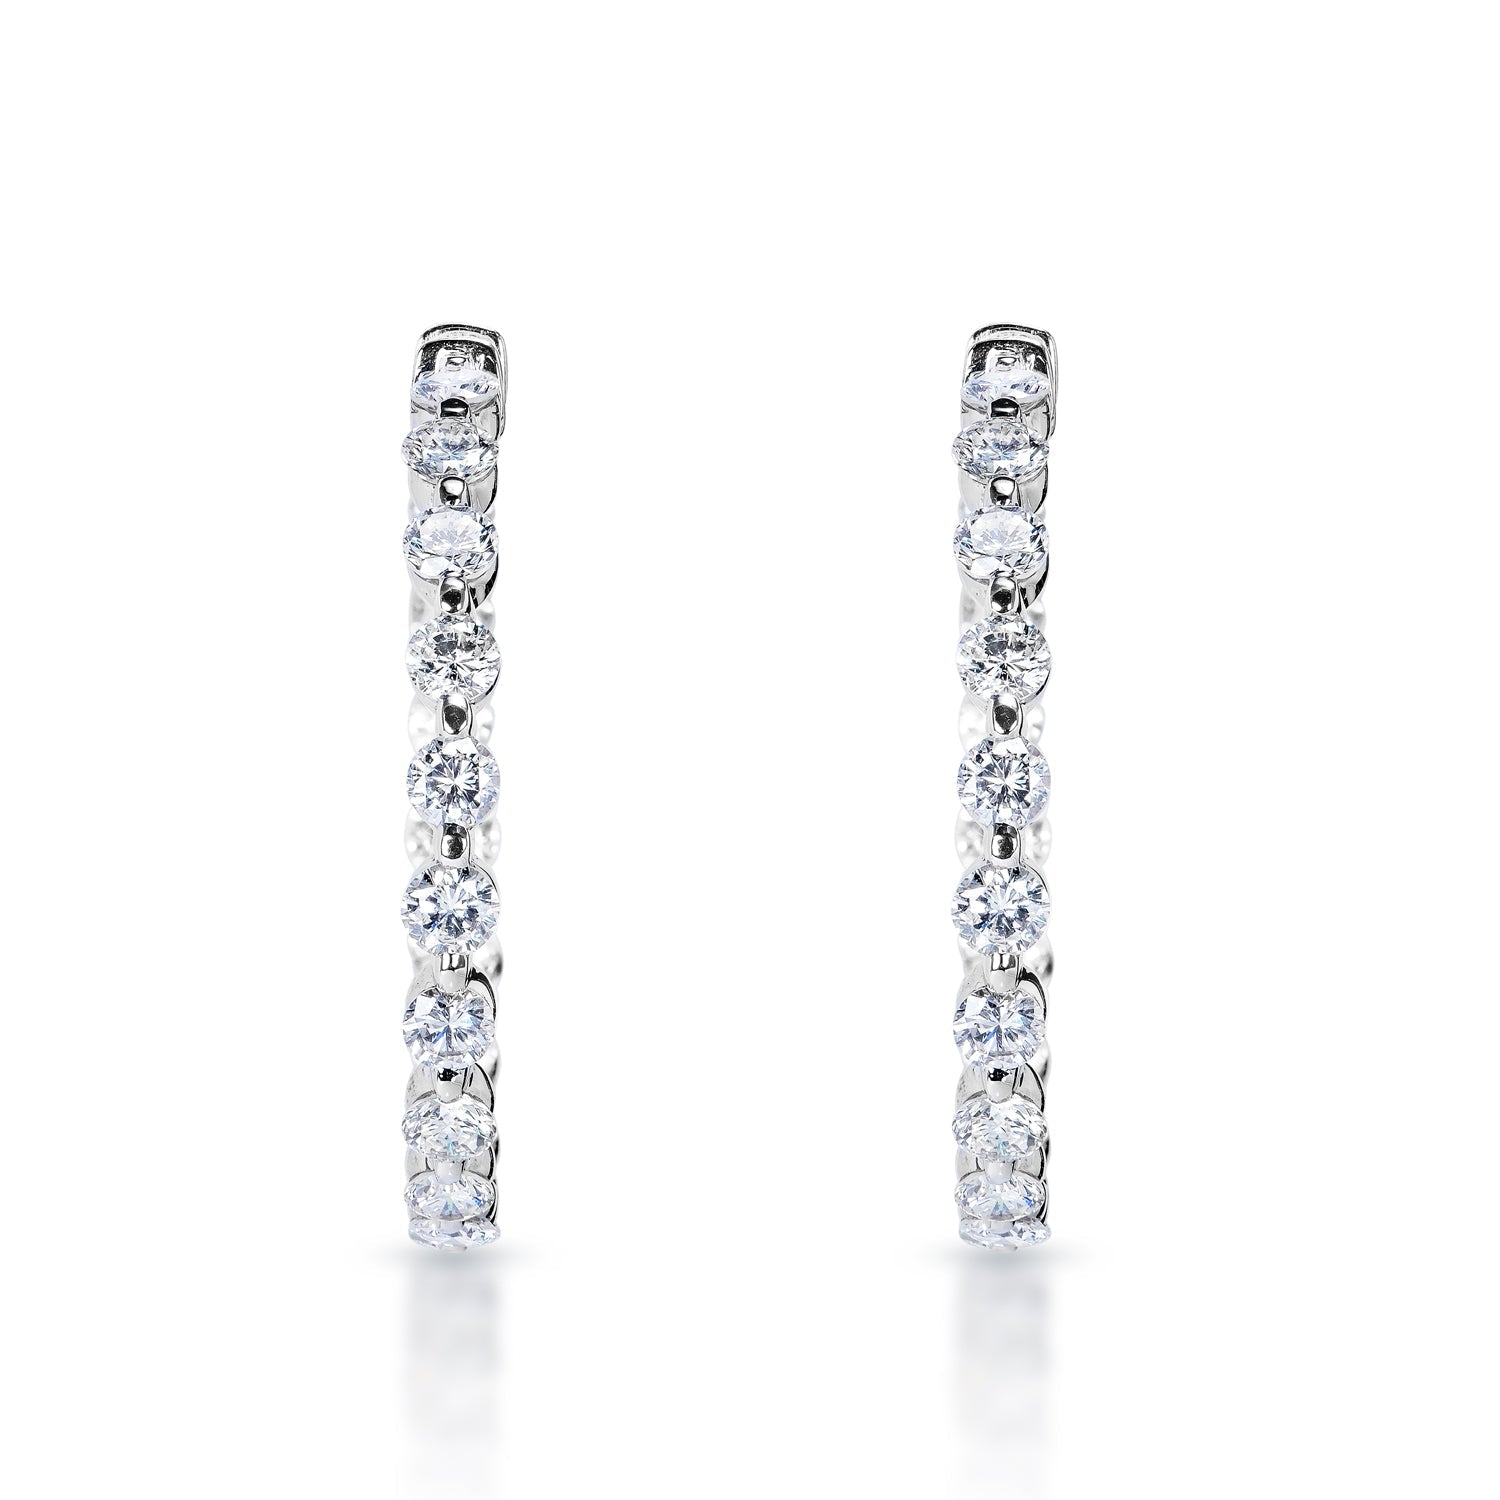 Kaitlyn 7 Carat Round Brilliant Diamond Hoop Earrings in 14k White Gold Front View